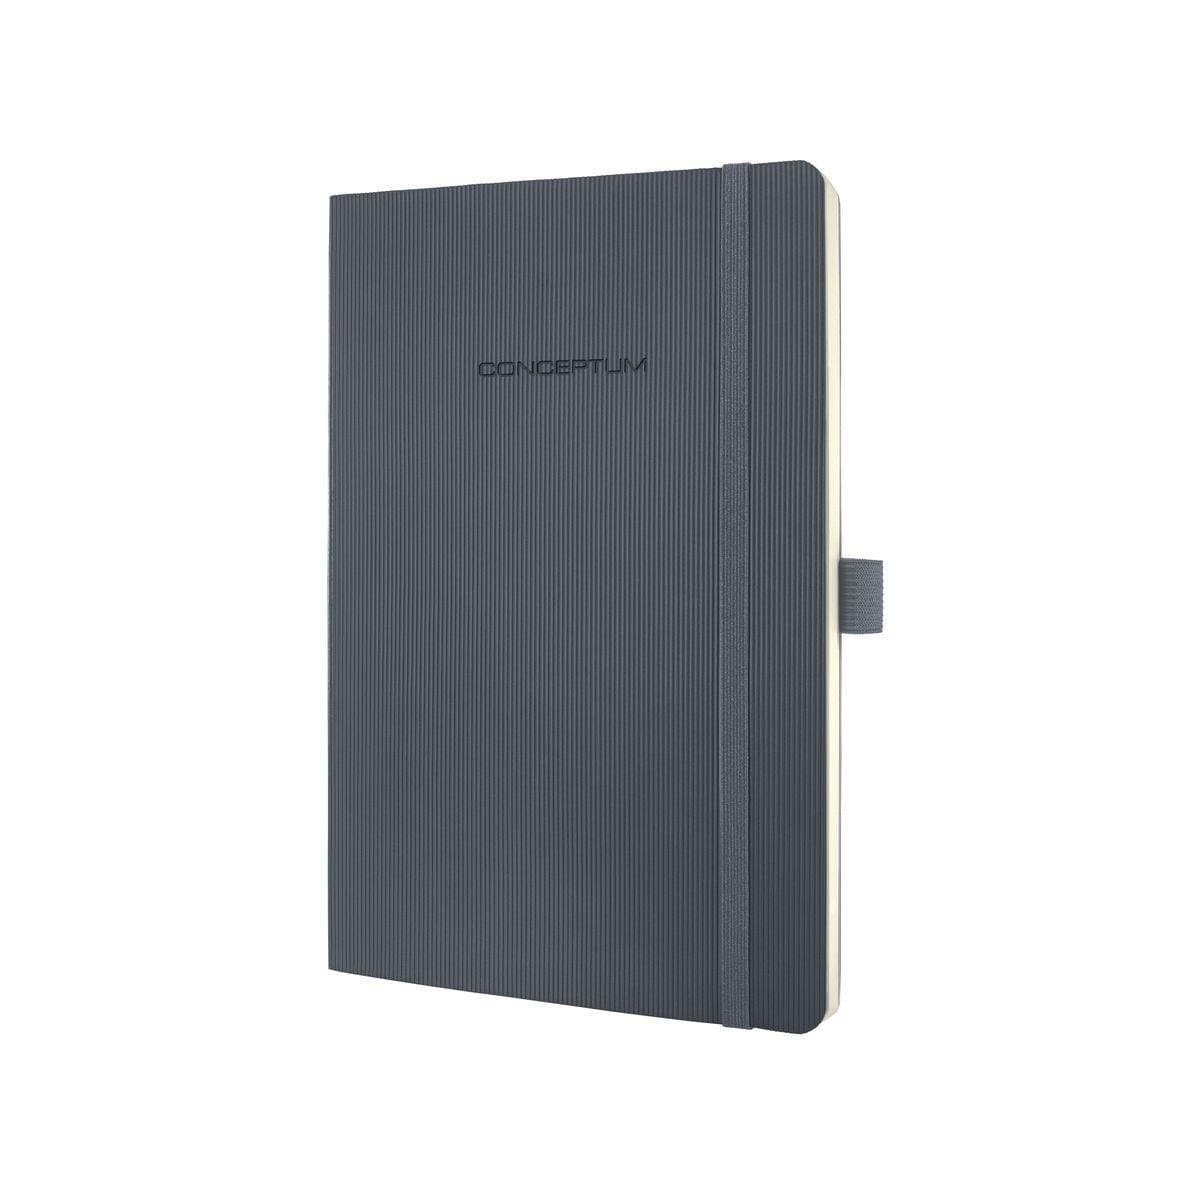 Sigel Notebook CONCEPTUM A5, Softcover, Lined, Anthracite